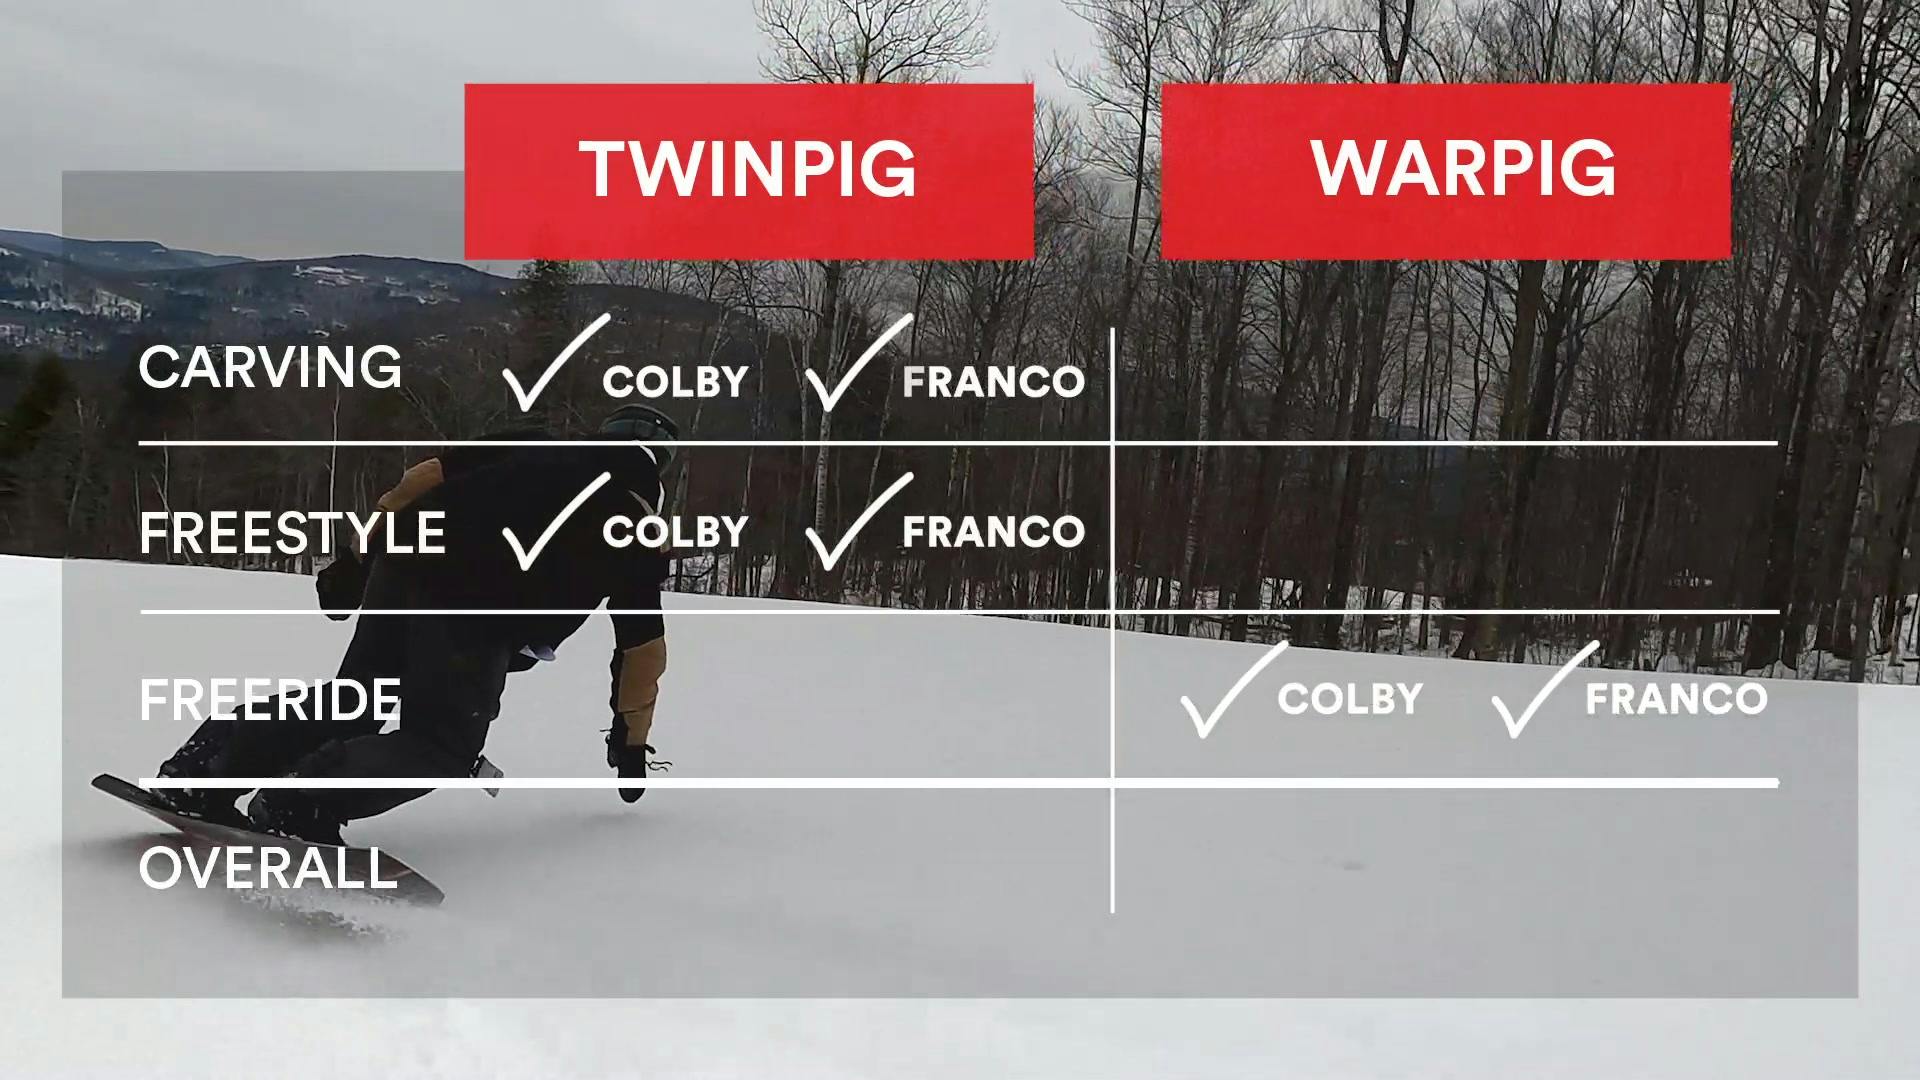 A leaderboard indicating that both Colby and Franco prefer the Ride Warpig for freeriding